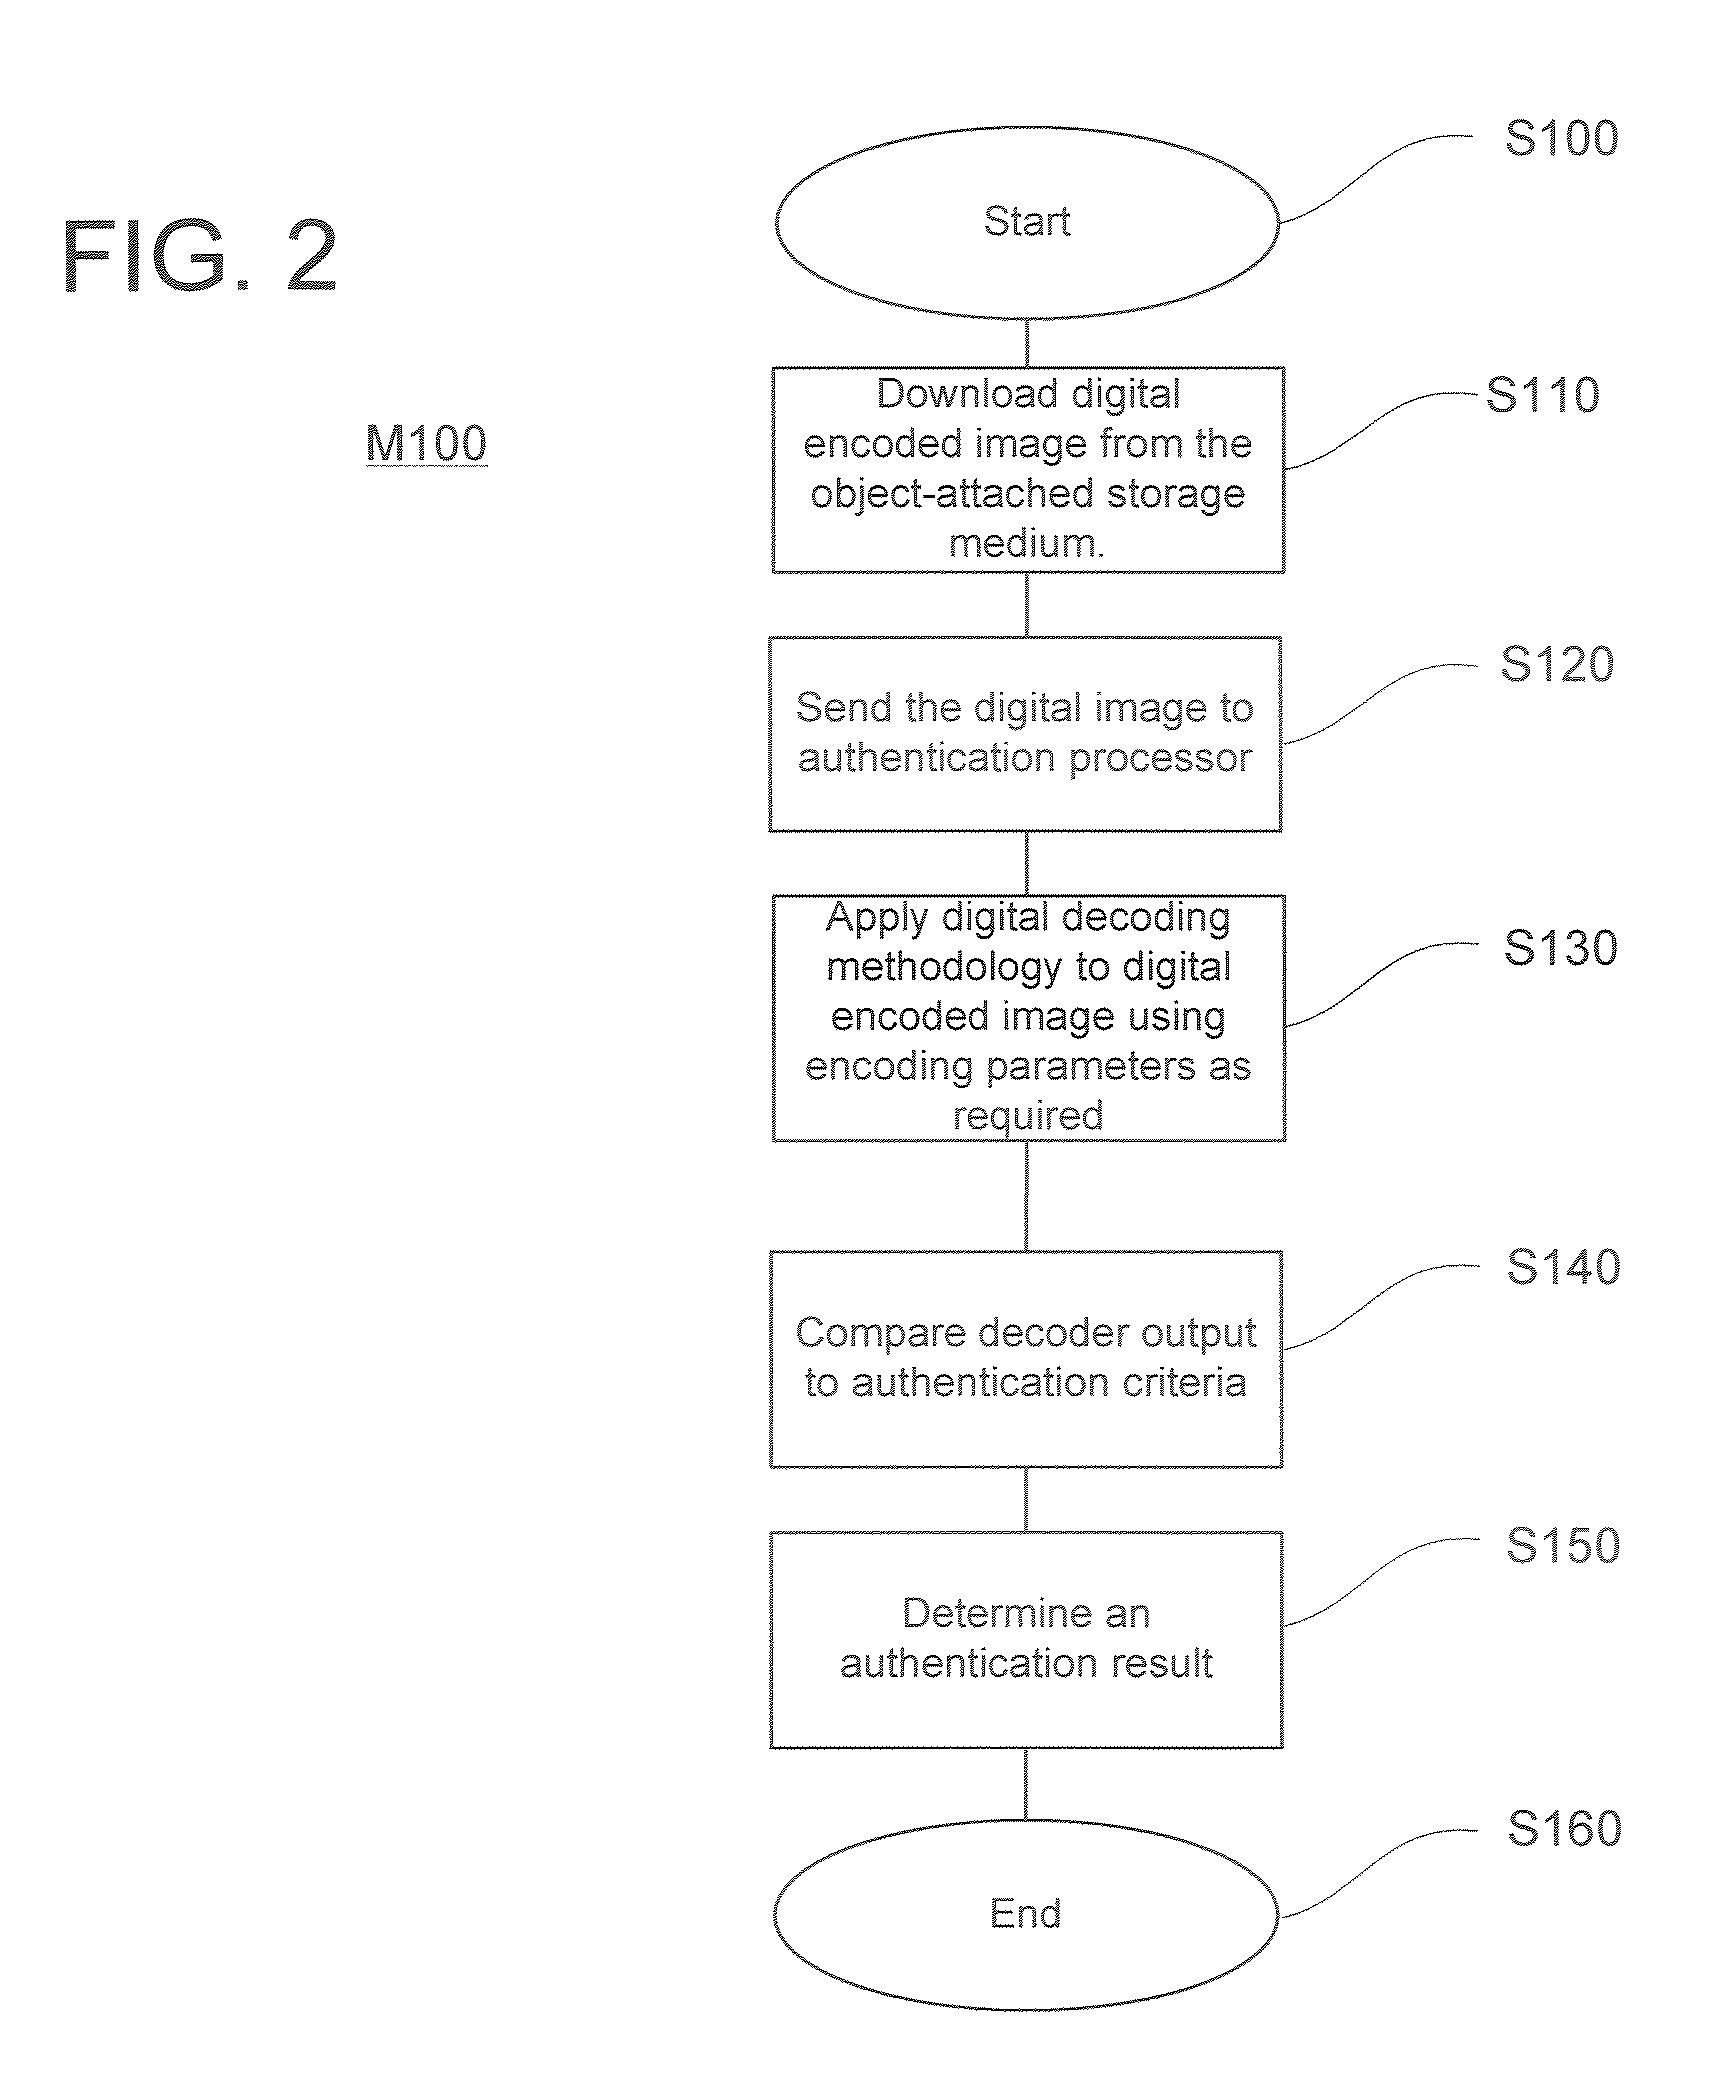 Object Authentication Using Encoded Images Digitally Stored on the Object